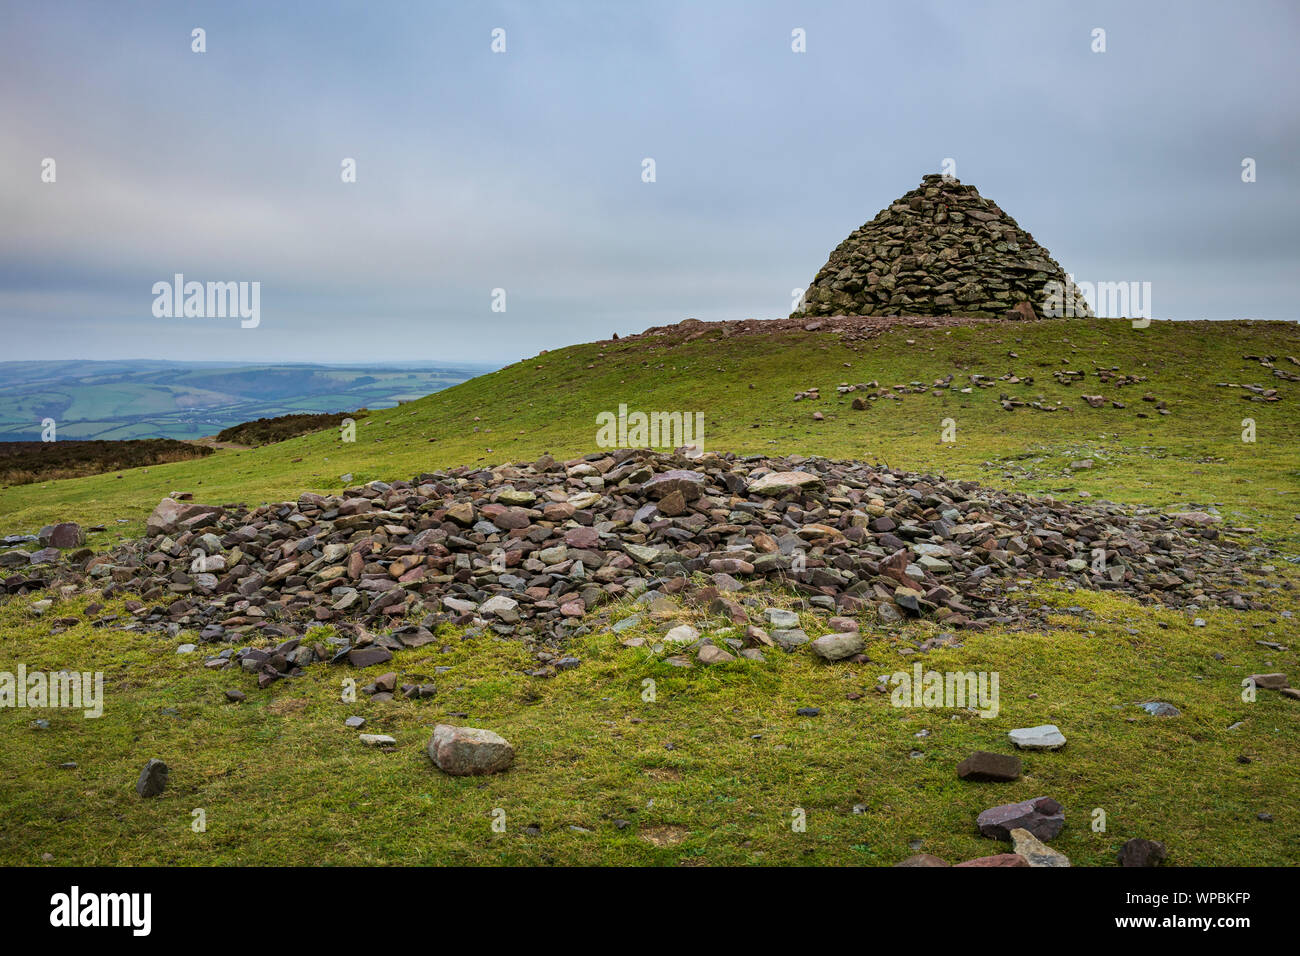 a view of the cairn on the top of dunkery beacon, Exmoor national park. Stock Photo